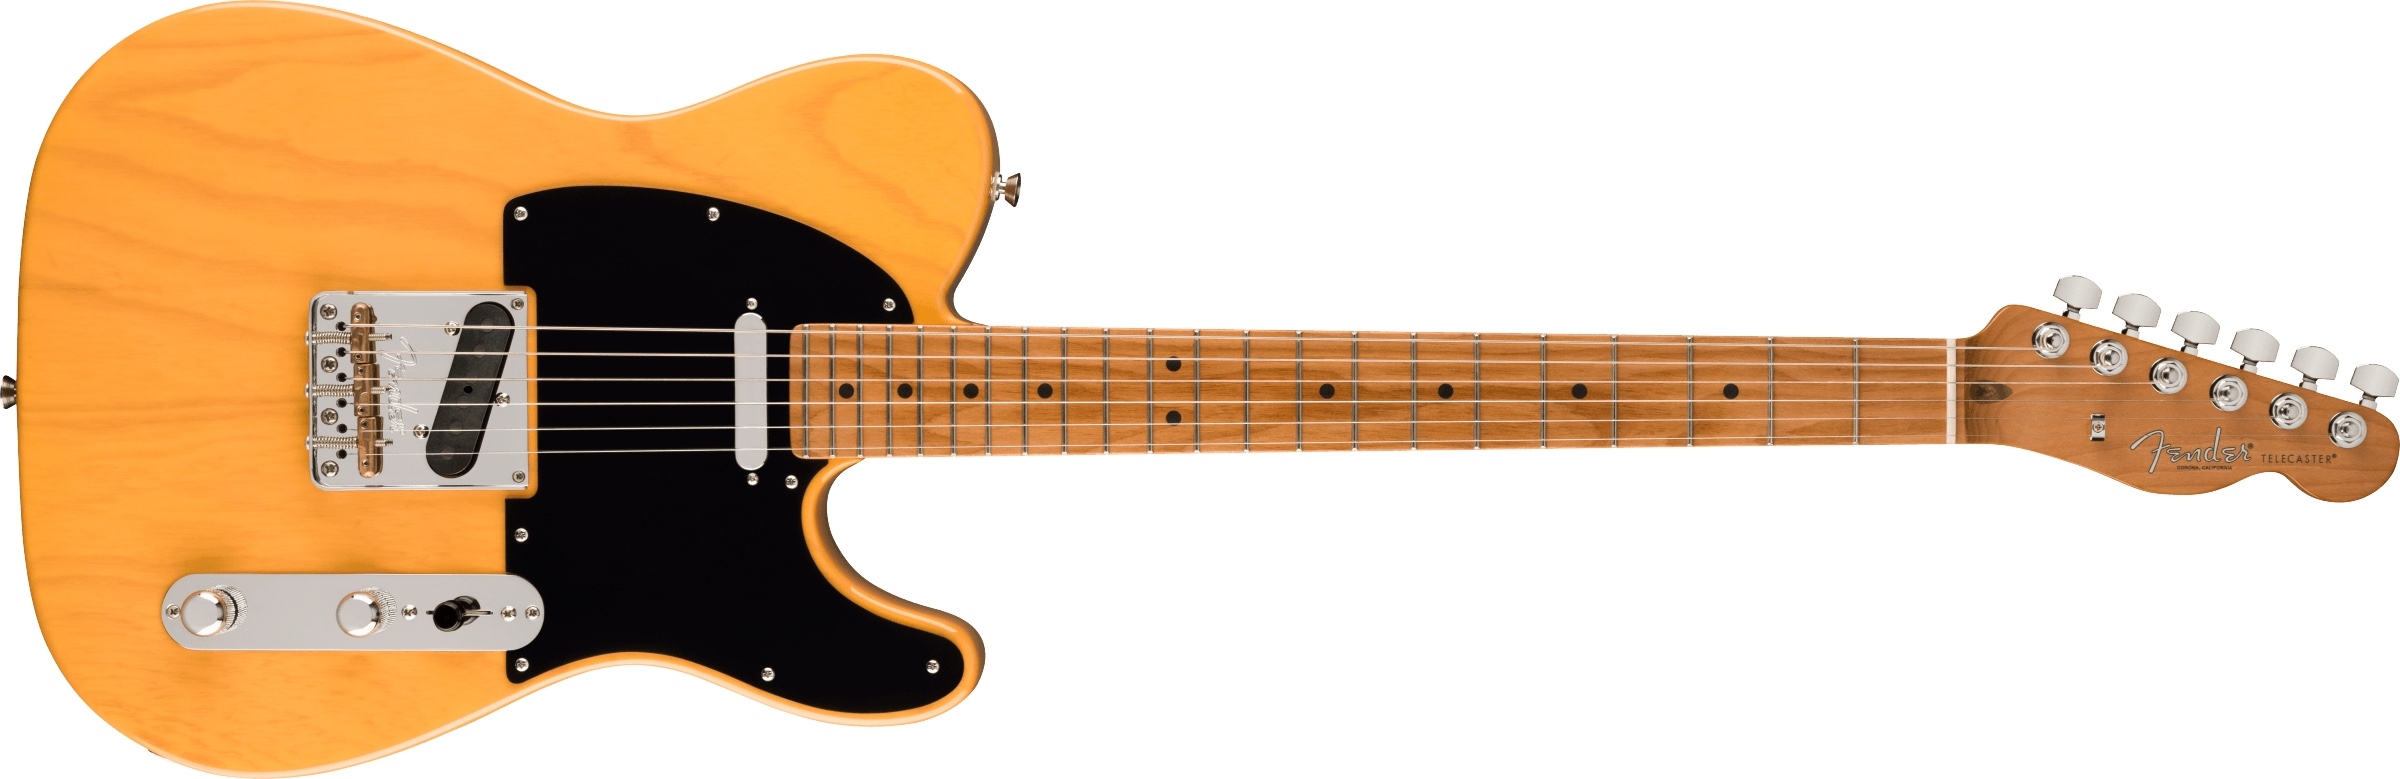 Fender Limited Edition American Professional II Telecaster Butterscotch  Blonde Ash/Roasted Maple